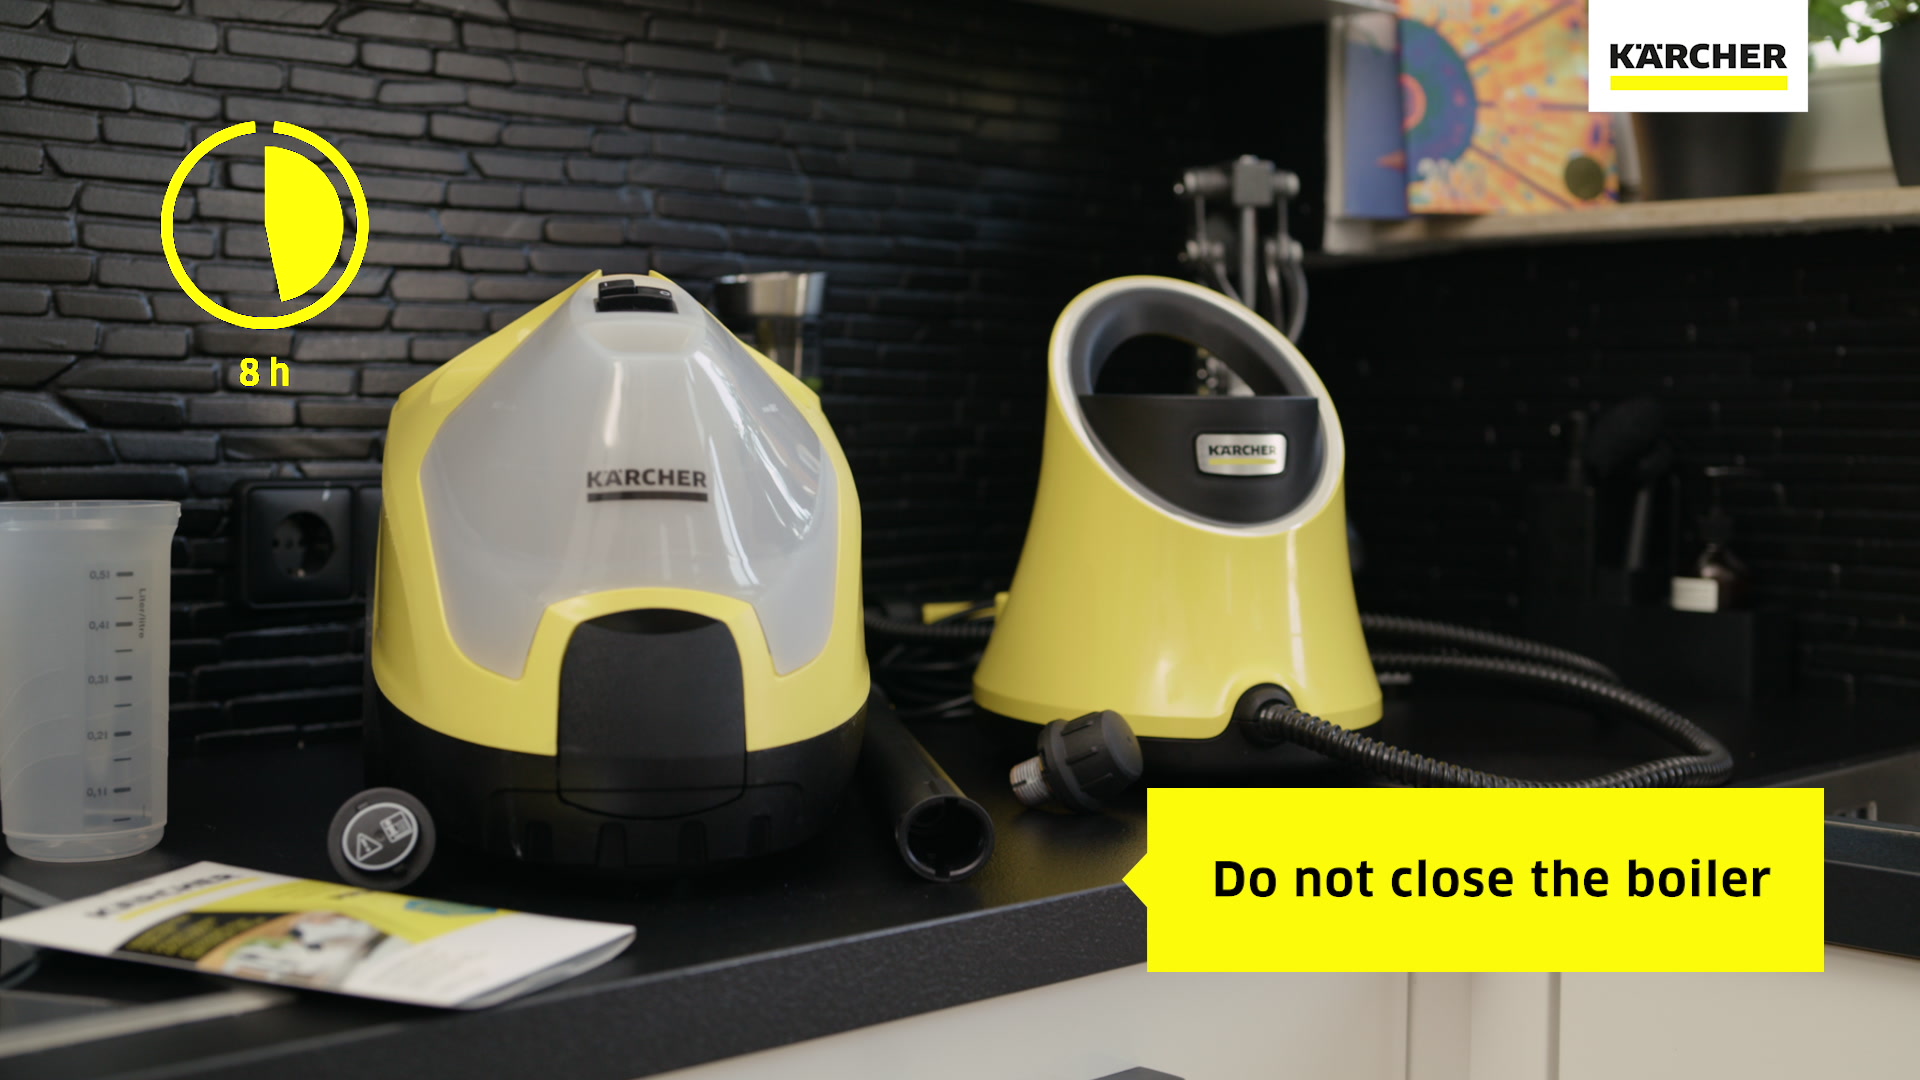 How to descale the K?rcher steam cleaner?